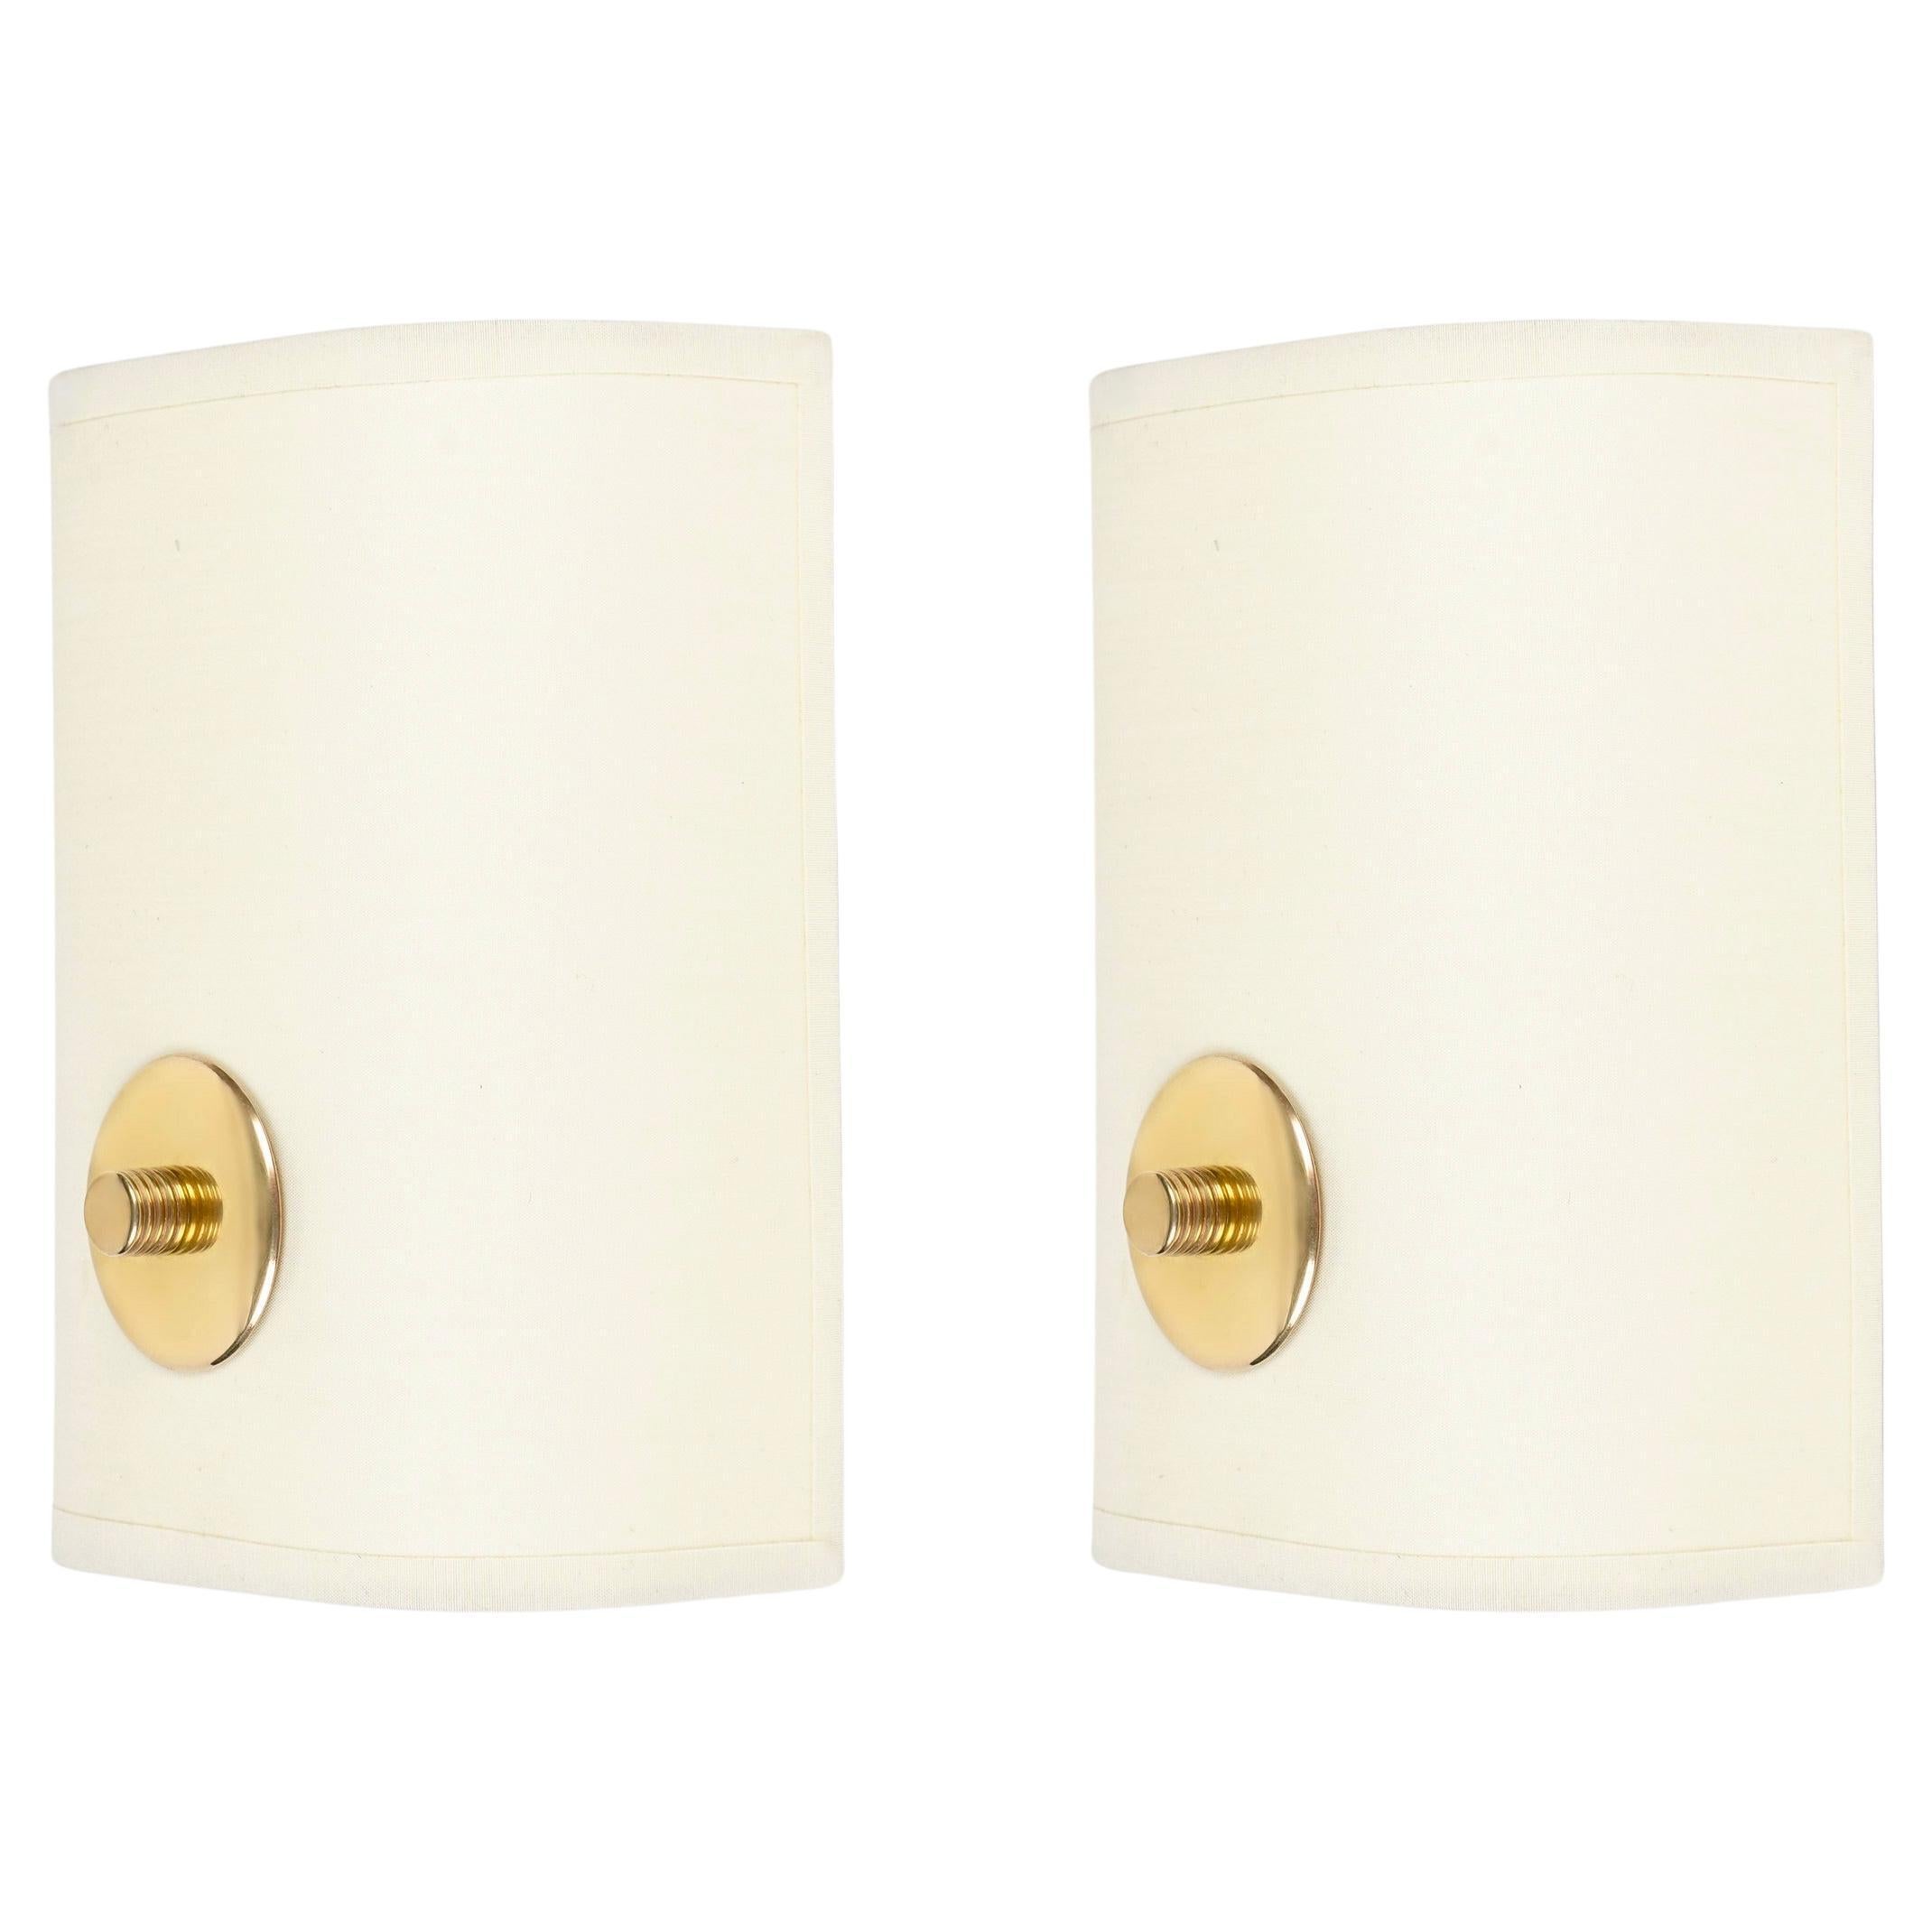 Composed of a rectangular screen laid vertically in off-white cotton, adorned on the lower part of the sconce's front face with a disk fitted with a cylindrical screw in gilded brass supporting the whole.

1 light arm.